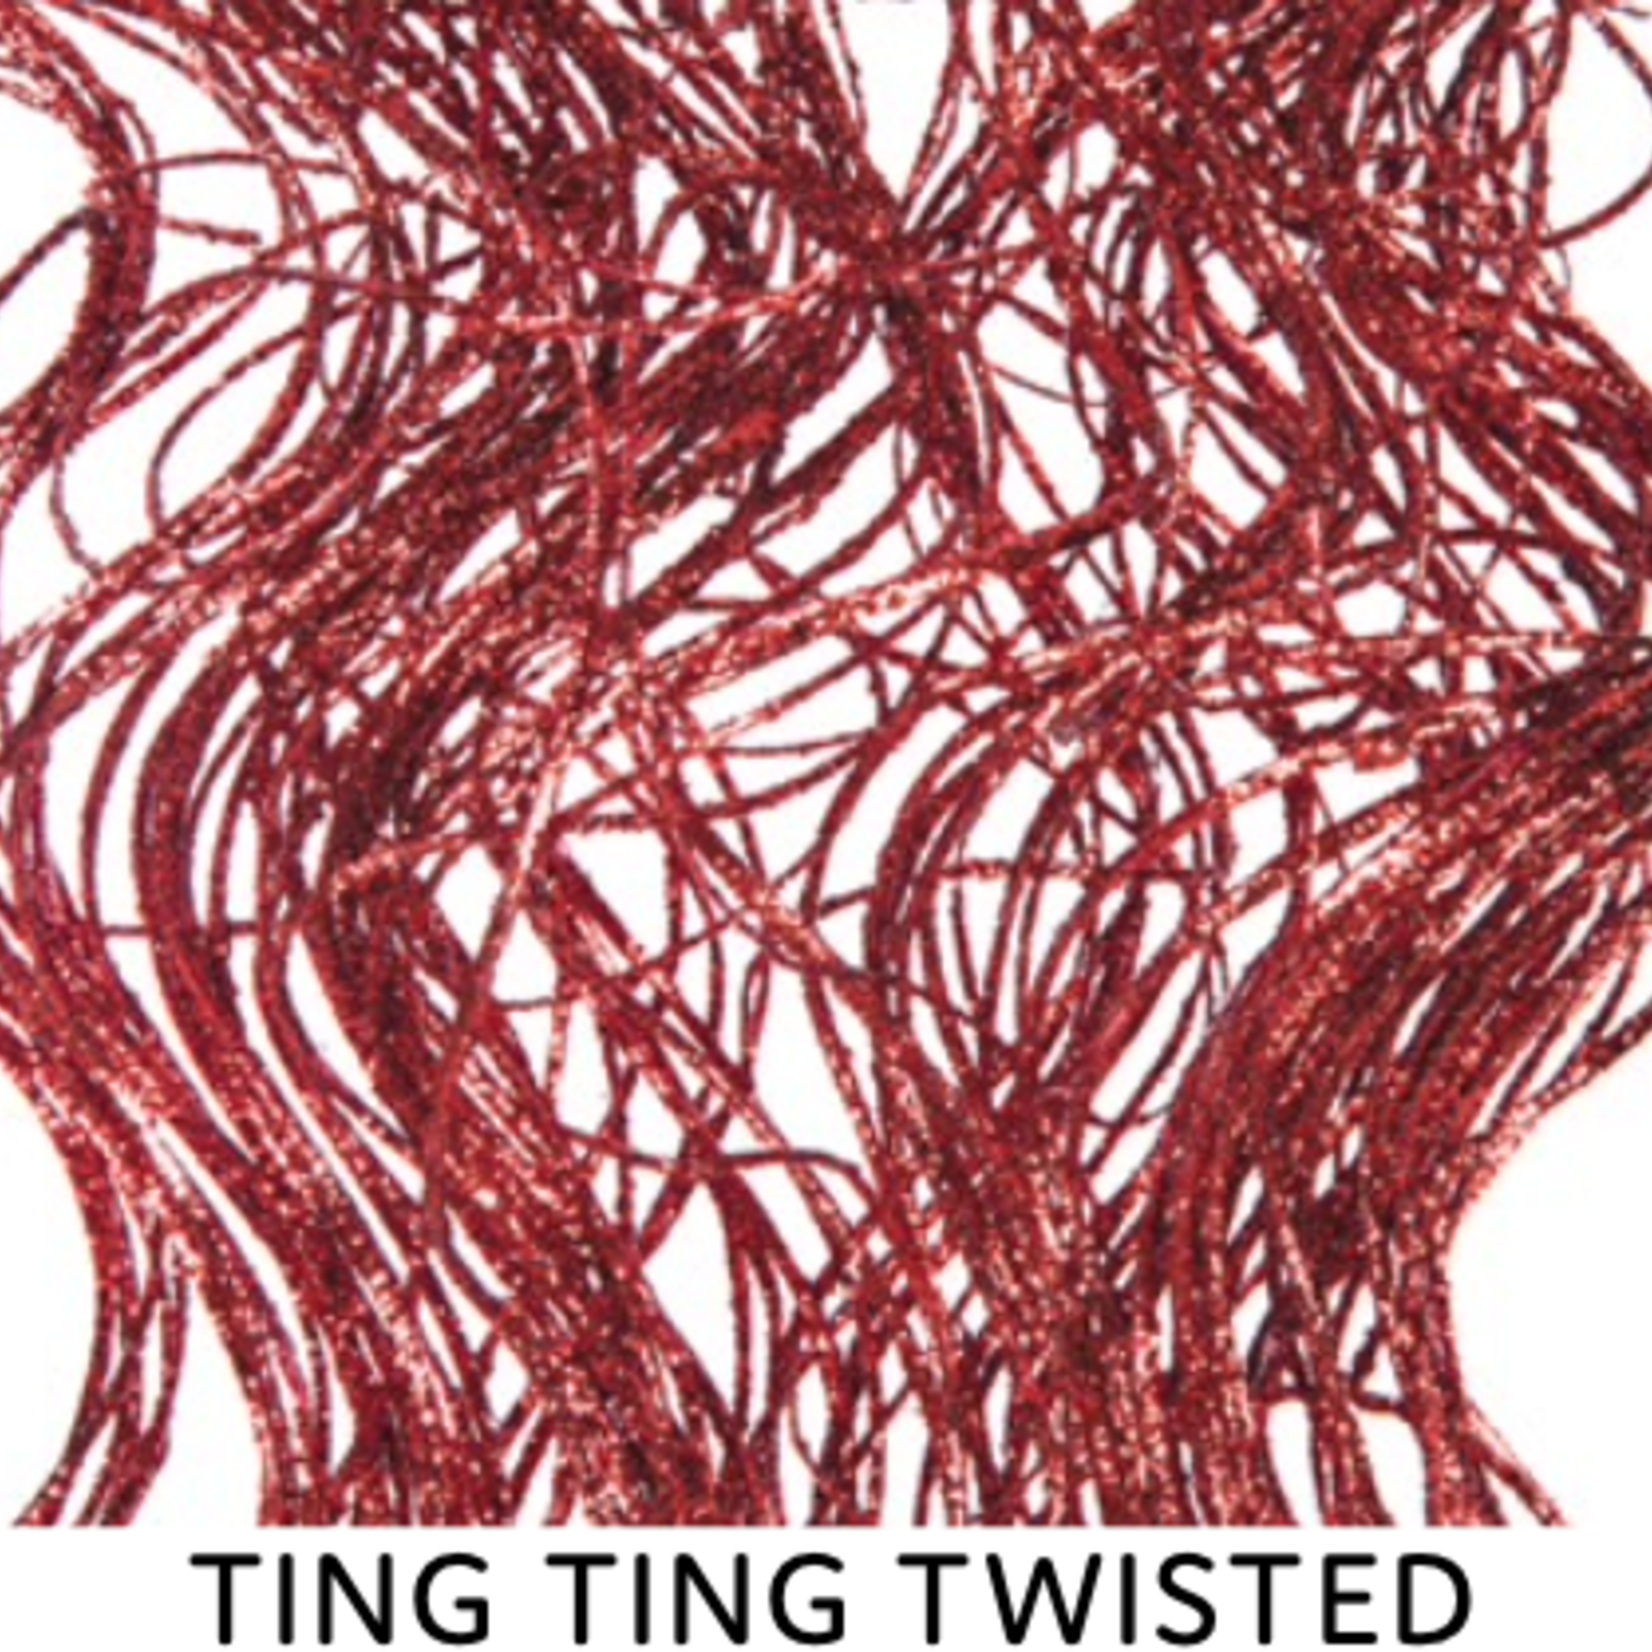 30" RED TWISTED SPARKLE 5-6 OZ TING TING, 80-90 stems